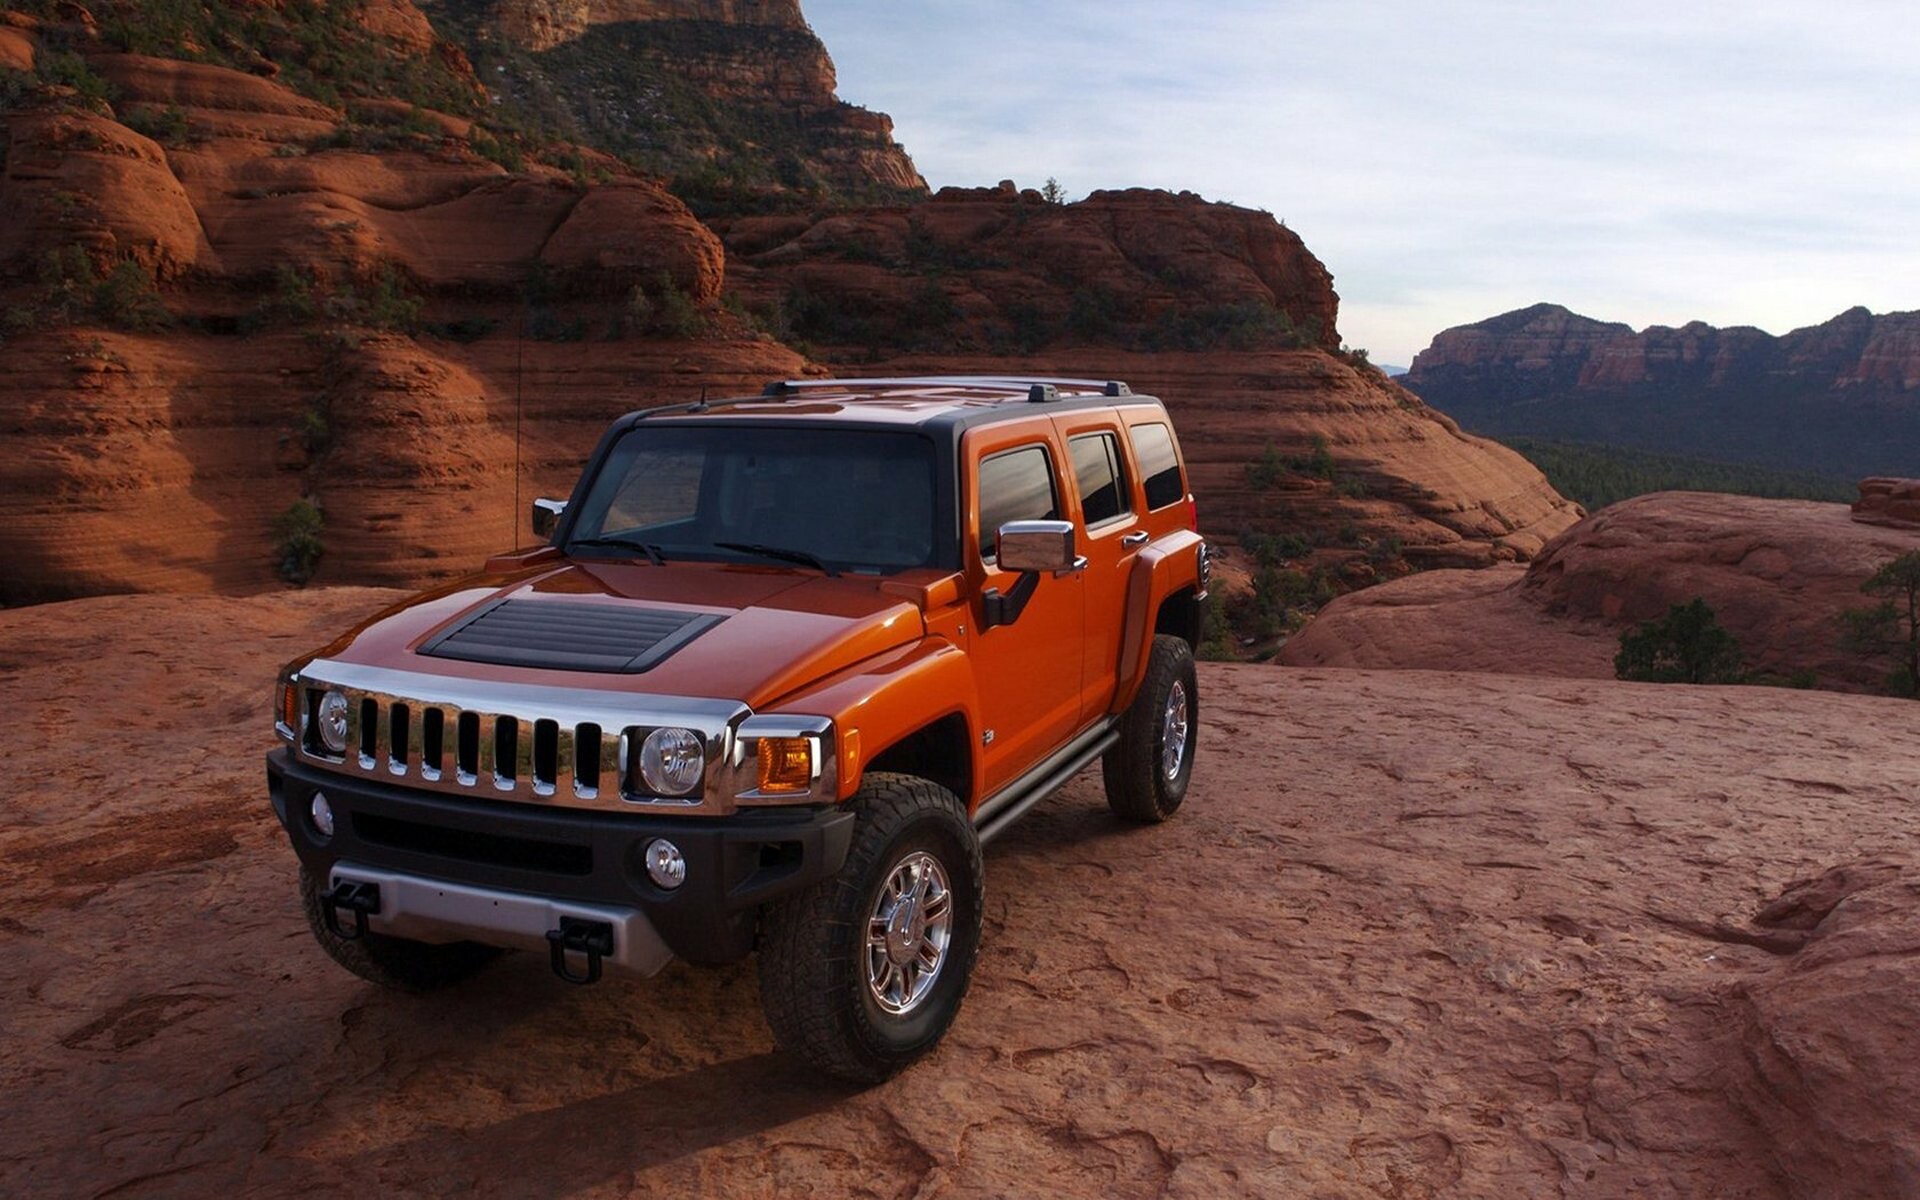 Hummer: H3 model, An off-road vehicle that was produced from 2005 to 2010 by General Motors. 1920x1200 HD Wallpaper.